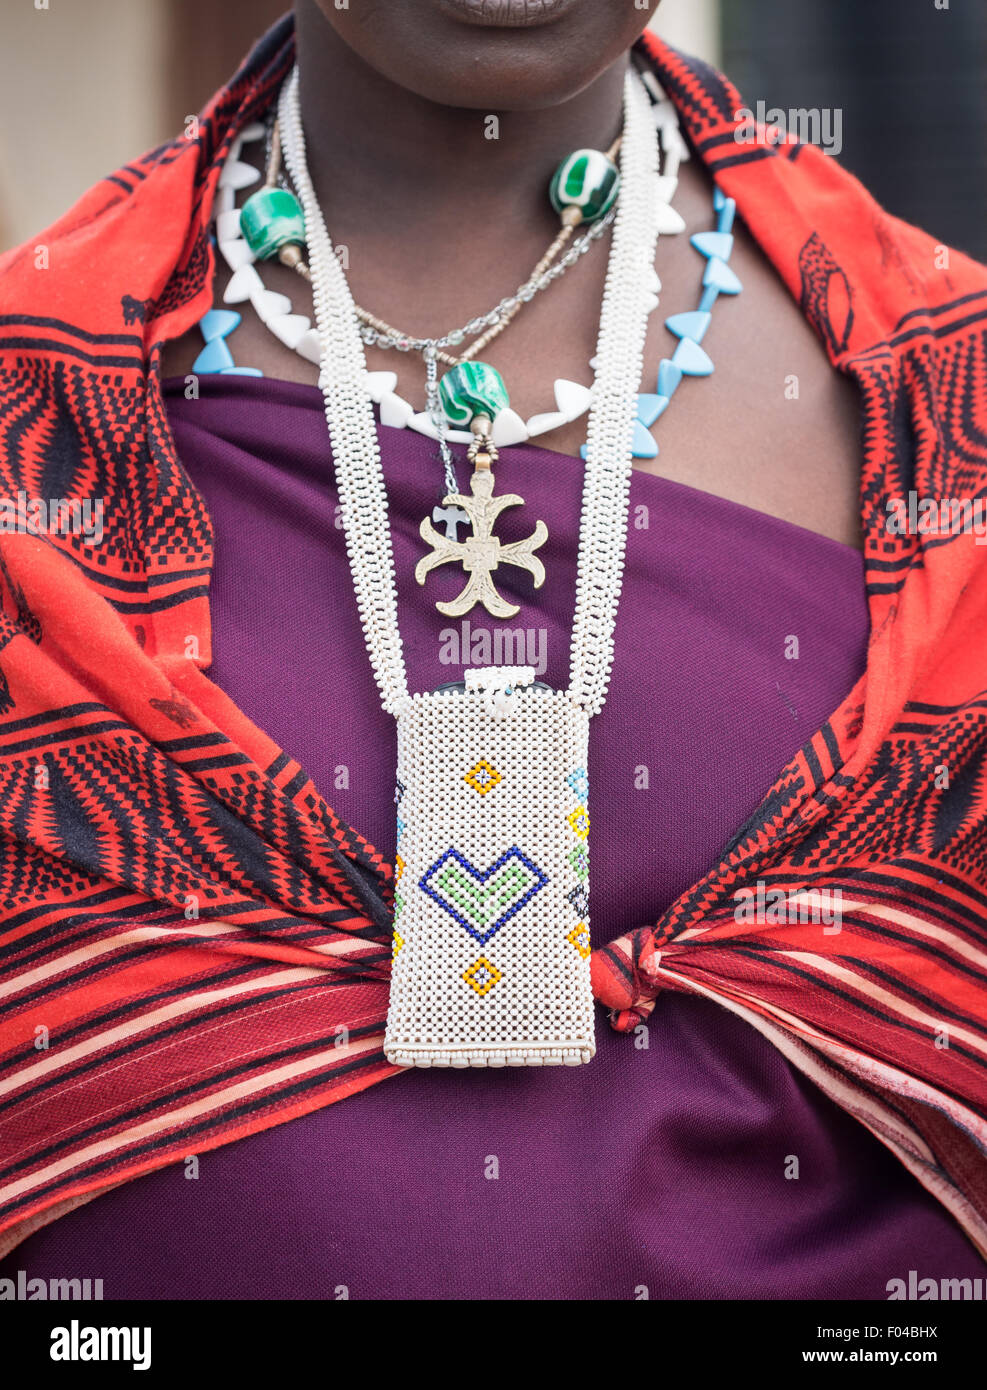 Beads phone case worn along with traditional necklaces by a Maasai woman in Tanzania, Africa. Stock Photo